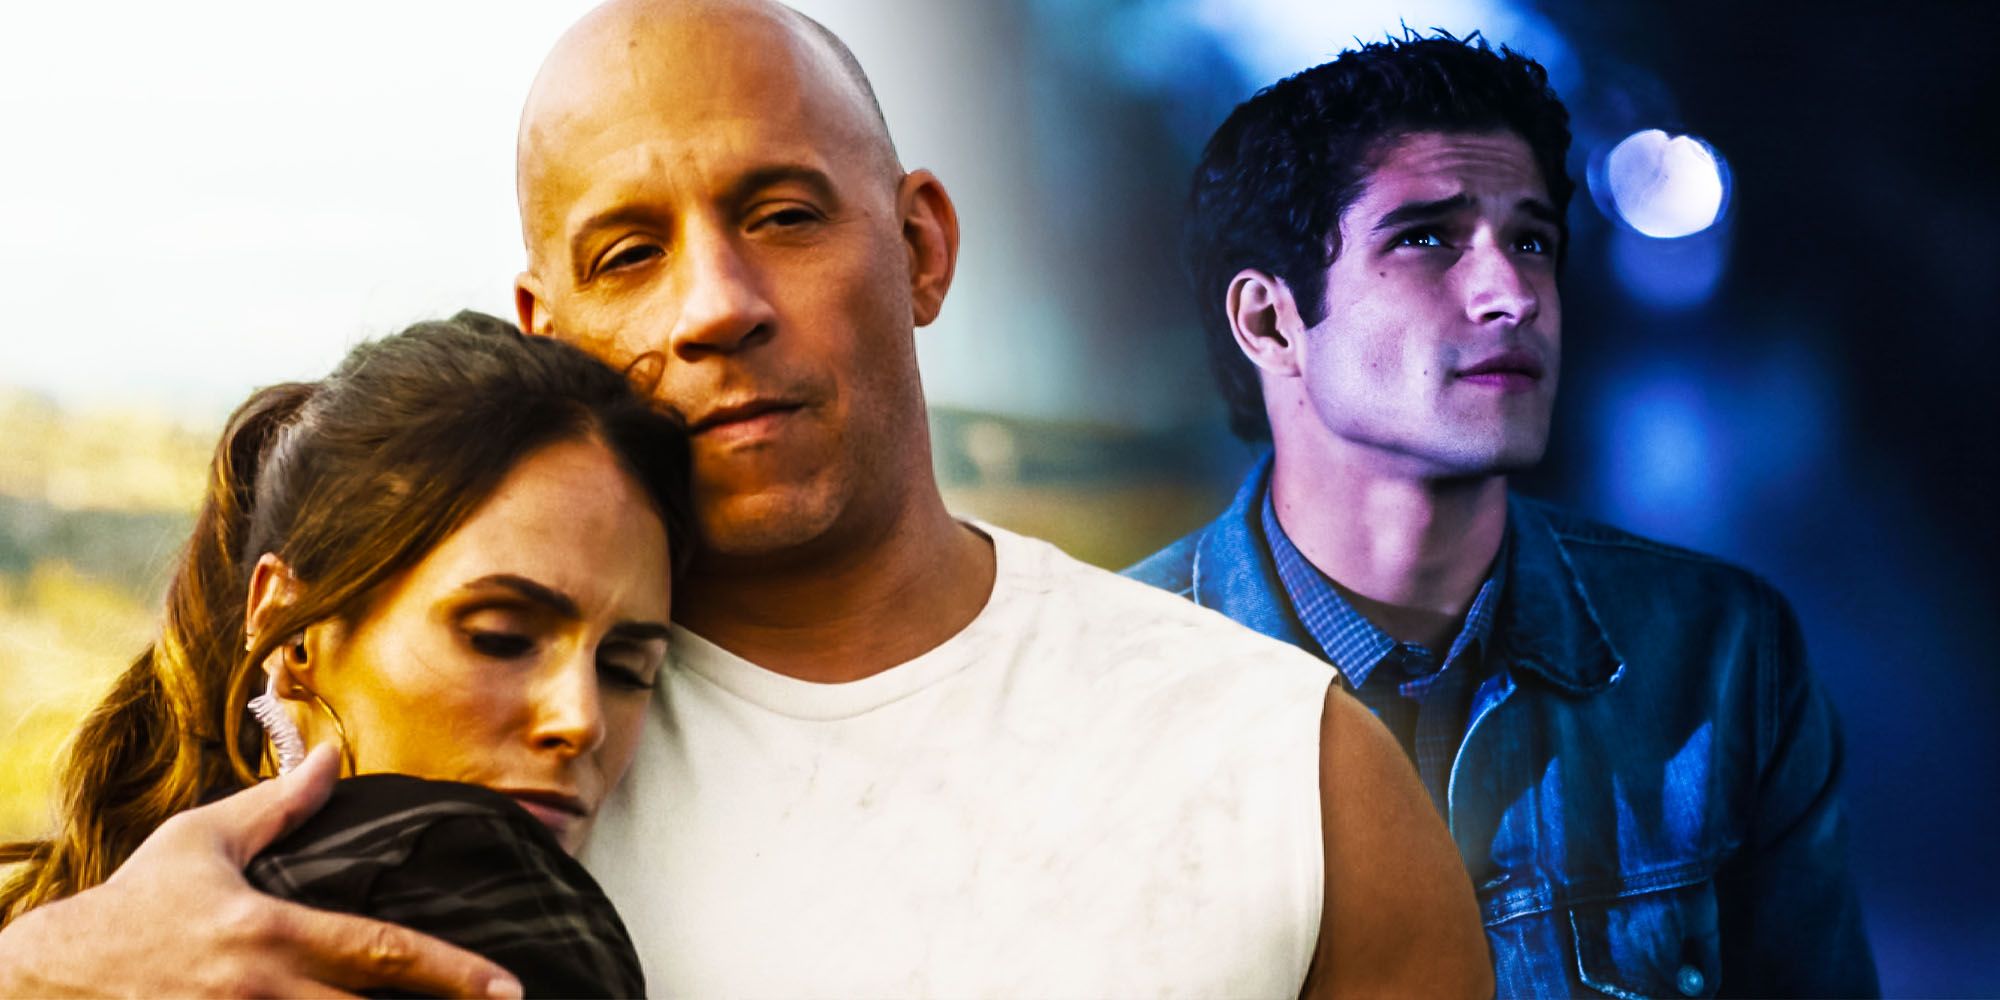 Fast & Furious Has 1 Toretto Family Member The Movies Haven’t Shown Yet